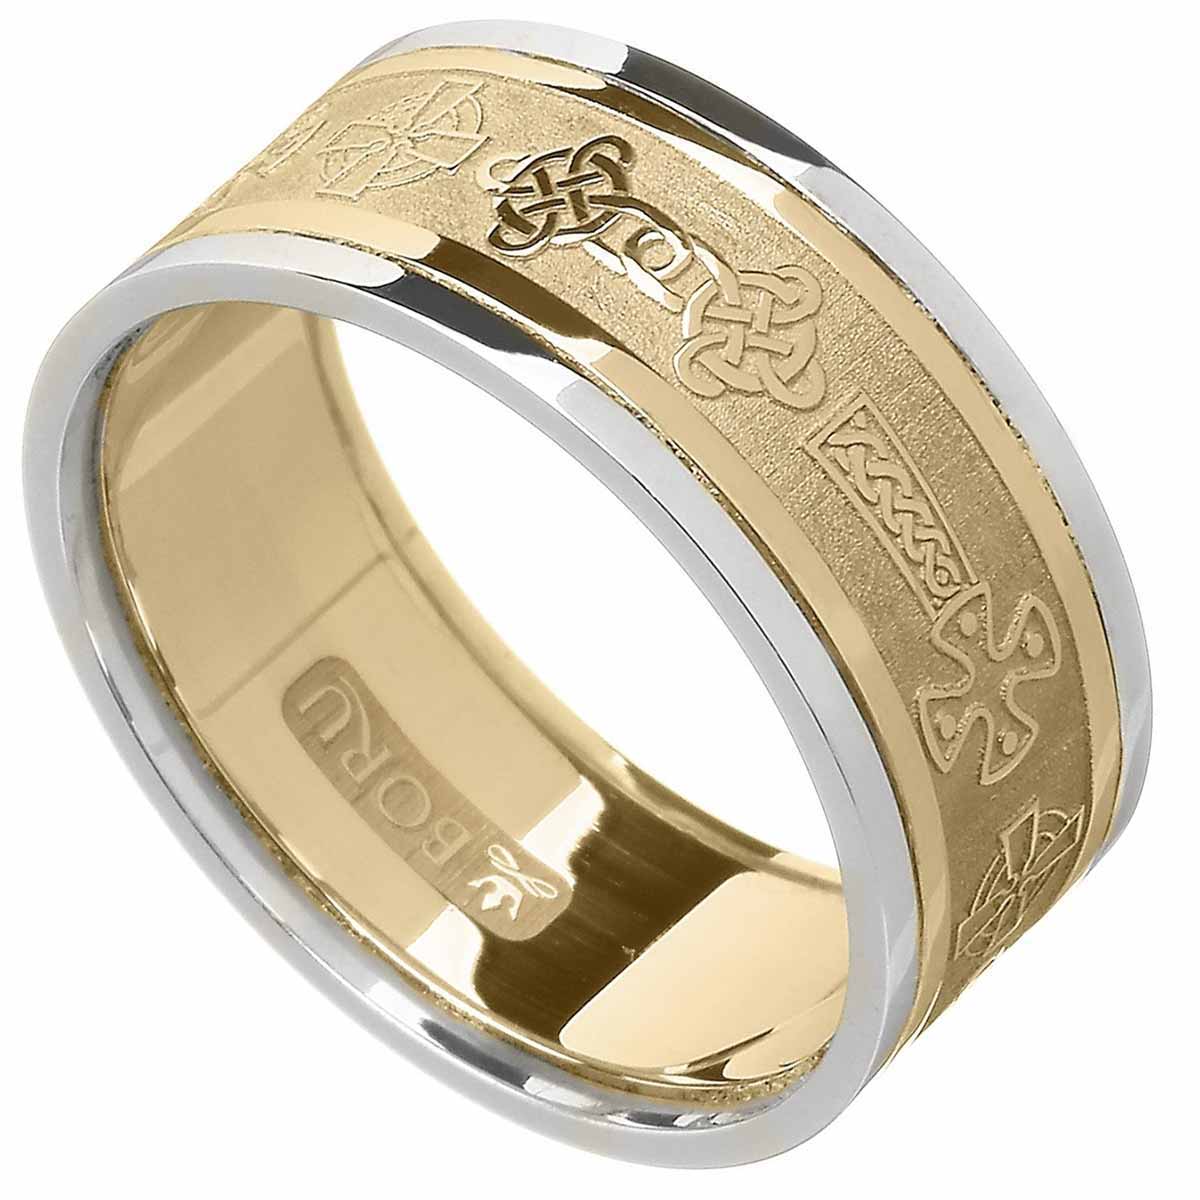 Product image for Celtic Ring - Men's Yellow Gold with White Gold Trim Celtic Cross Wedding Ring